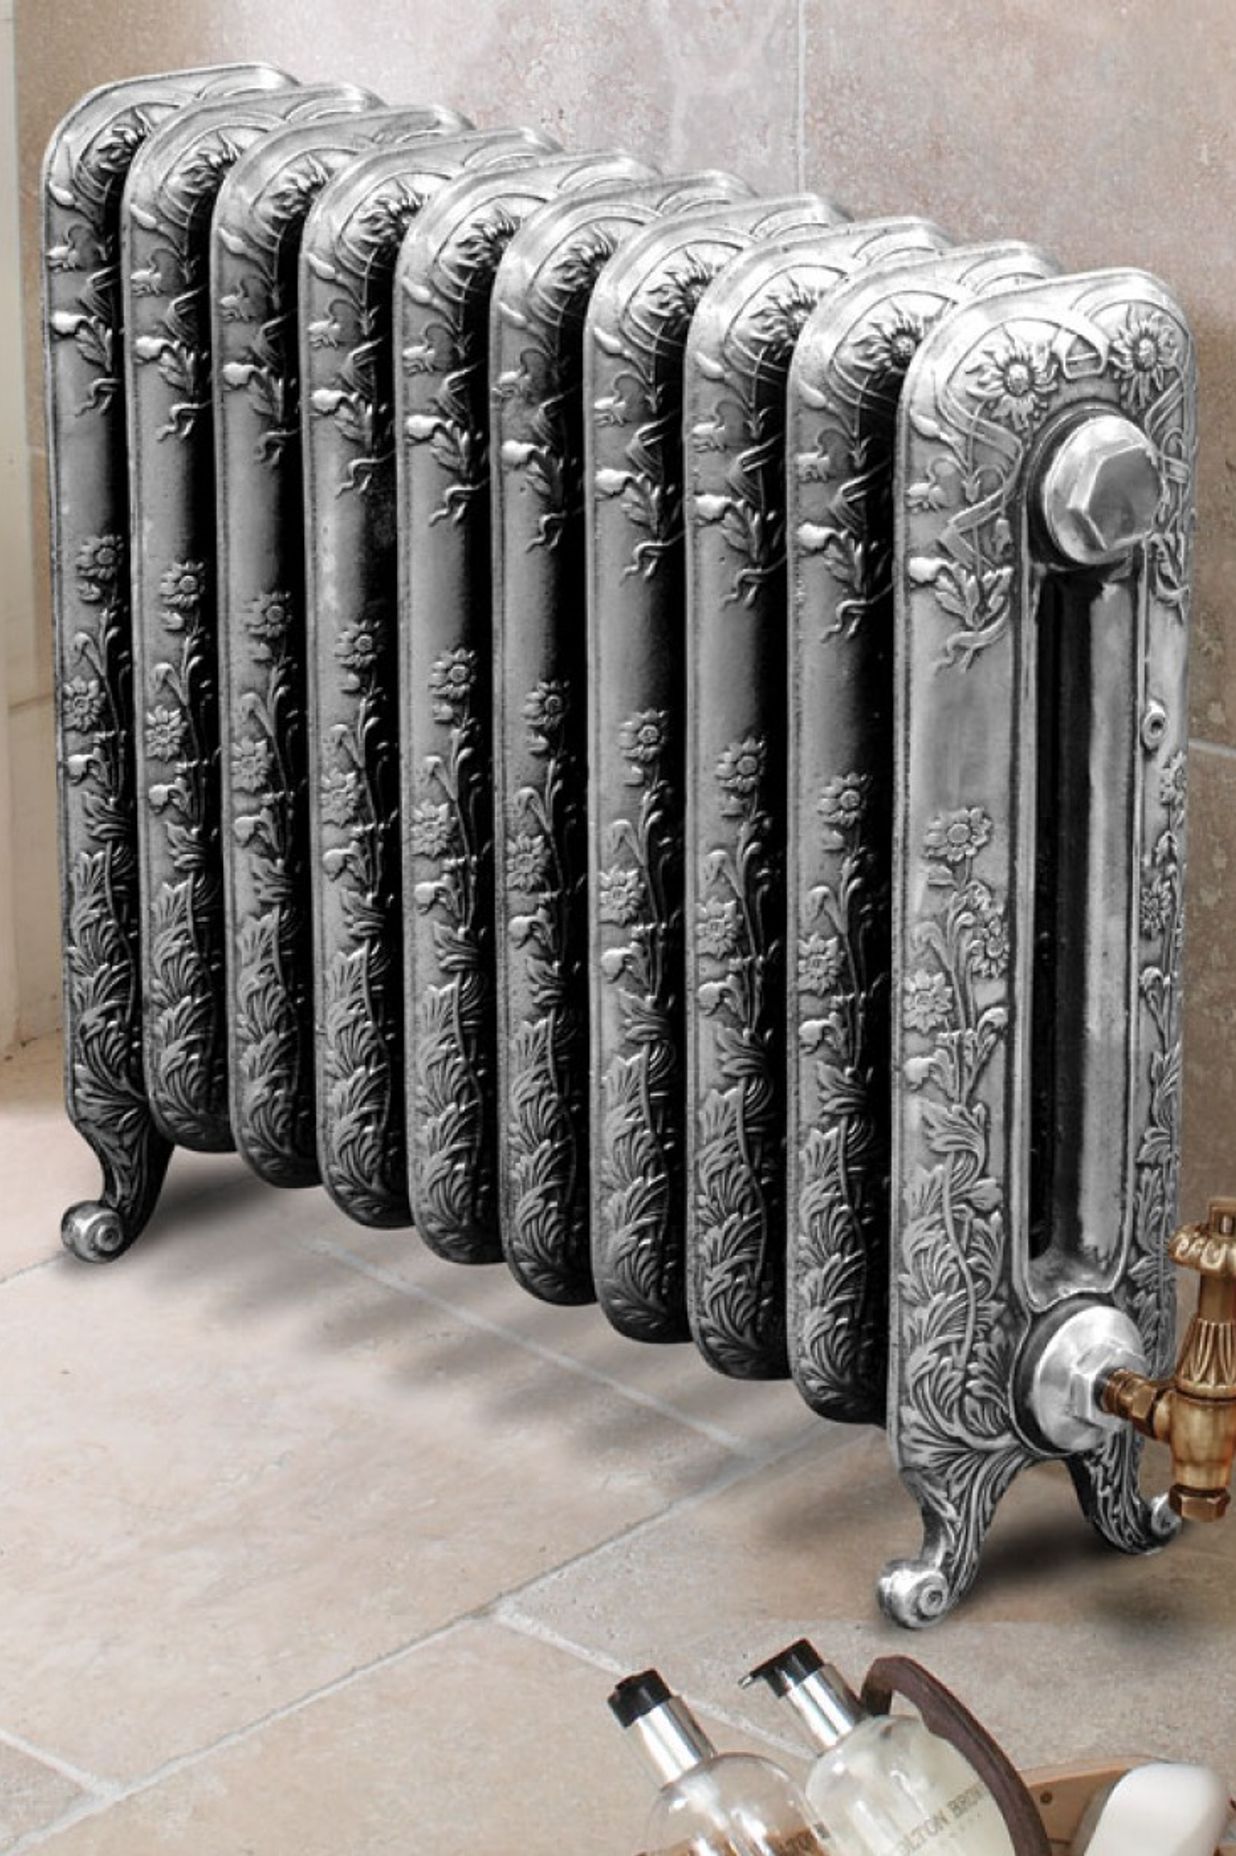 The Montpellier cast iron radiator from Paladin is customisable to suit your style